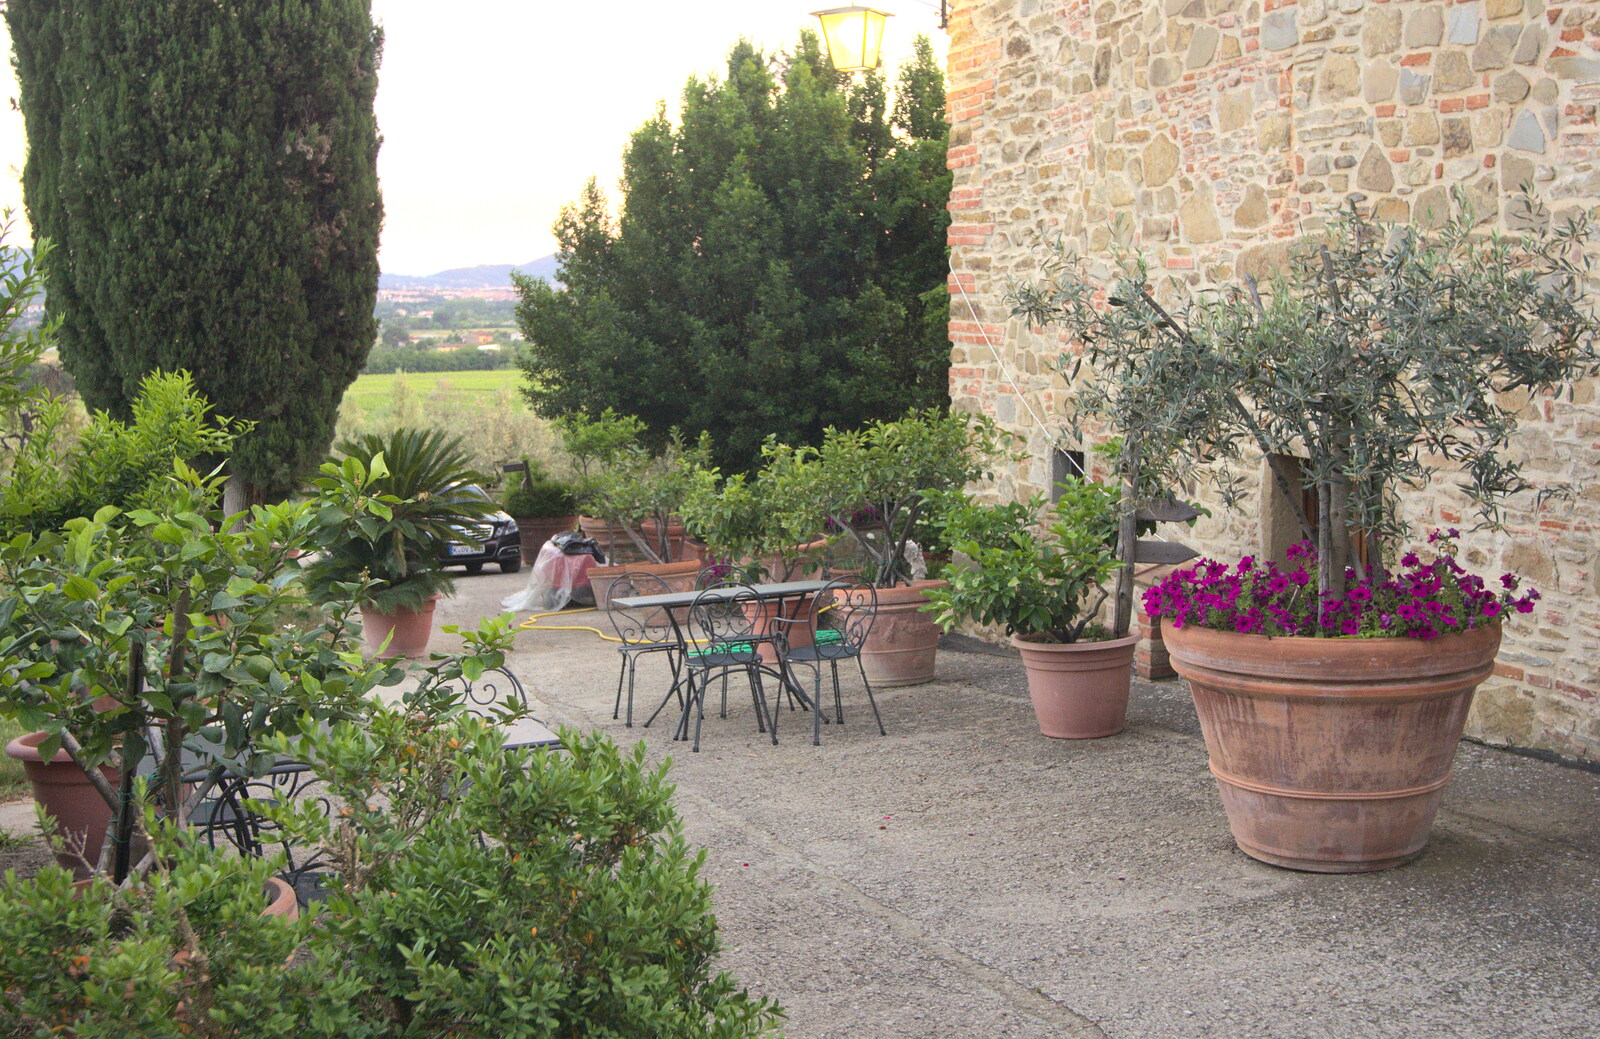 The giant pots of Il Palazzo from La Verna Monastery and the Fireflies of Tuscany, Italy - 14th June 2013